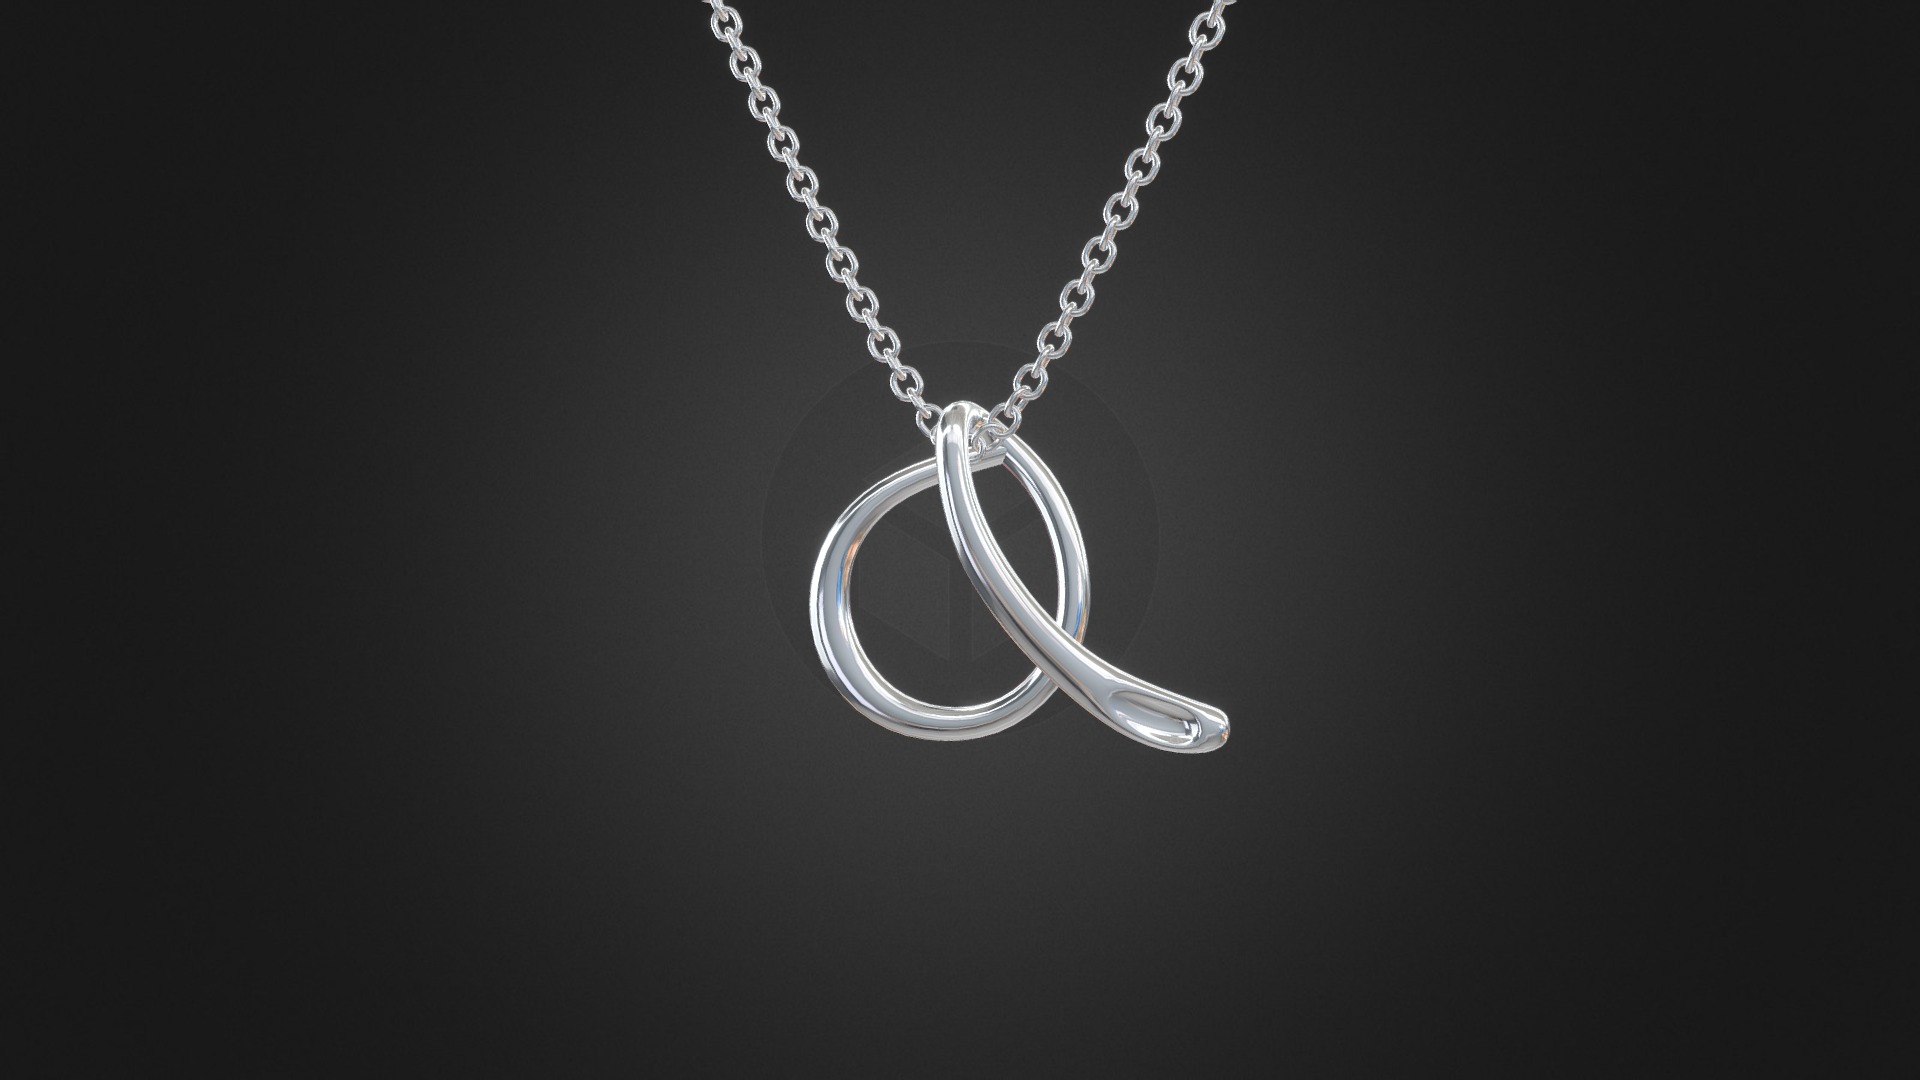 3D model 1059 – Pendant - This is a 3D model of the 1059 - Pendant. The 3D model is about a silver chain with a diamond pendant.